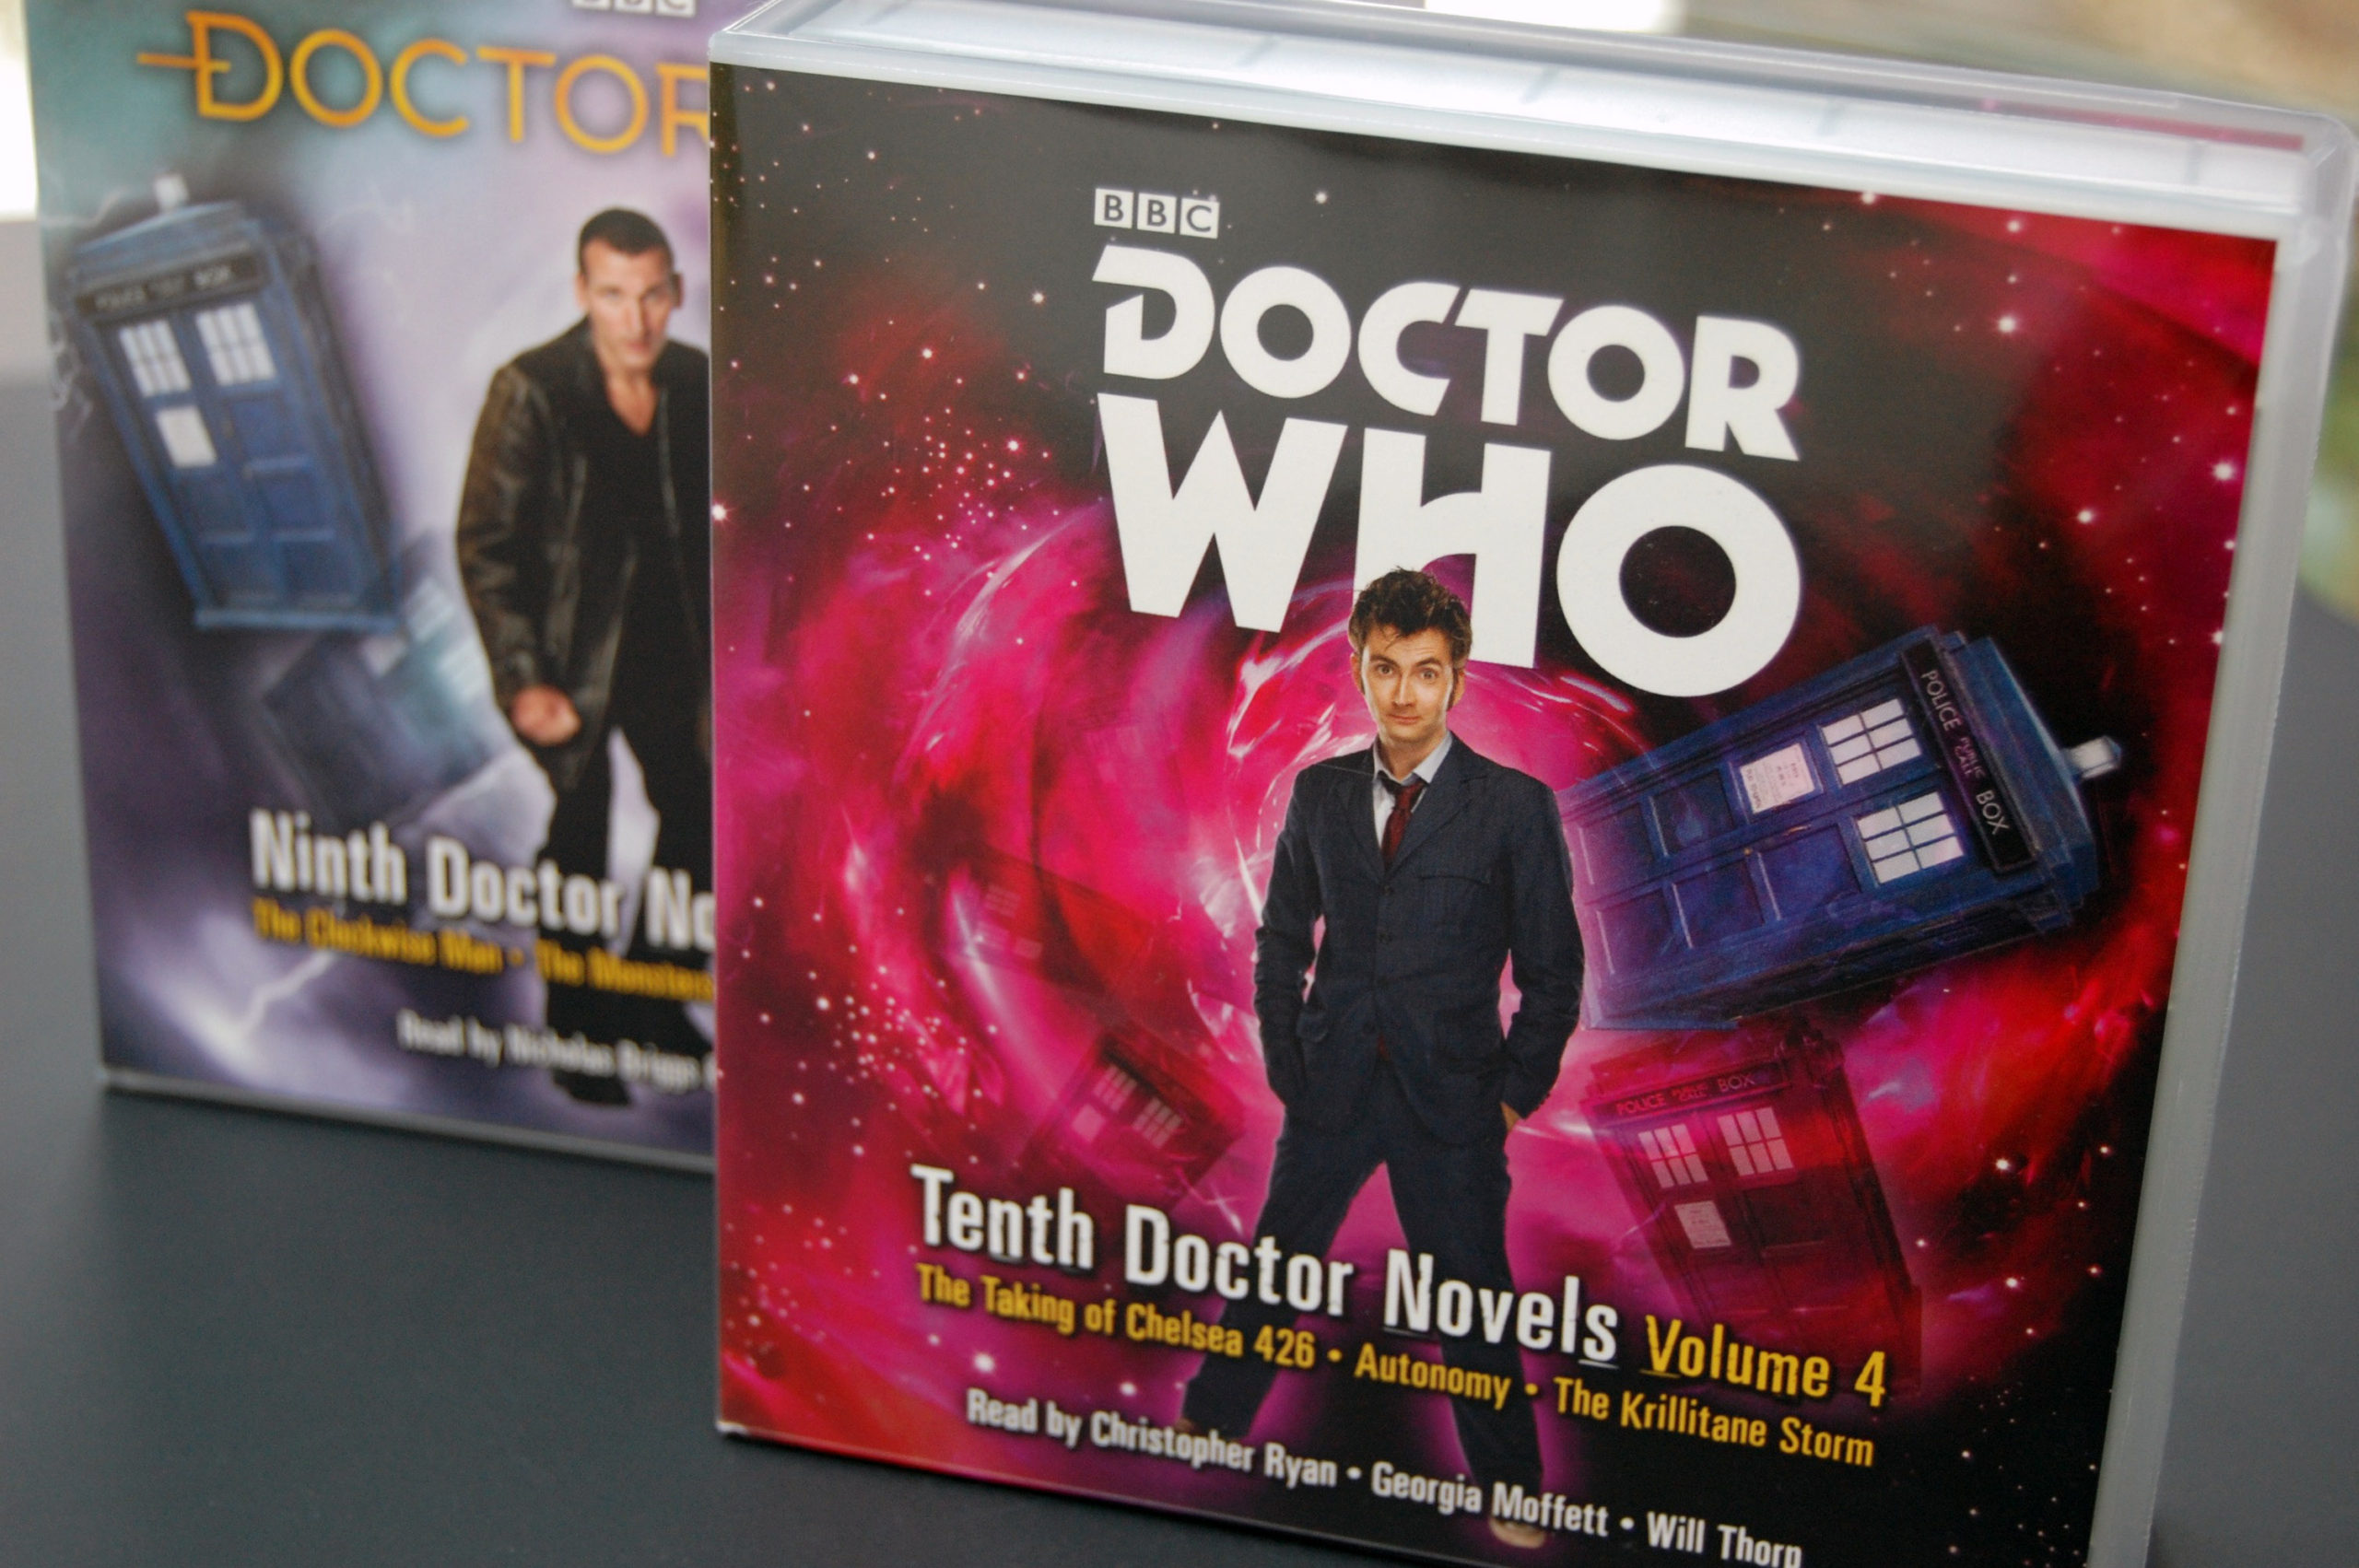 Doctor Who audio CD packaging